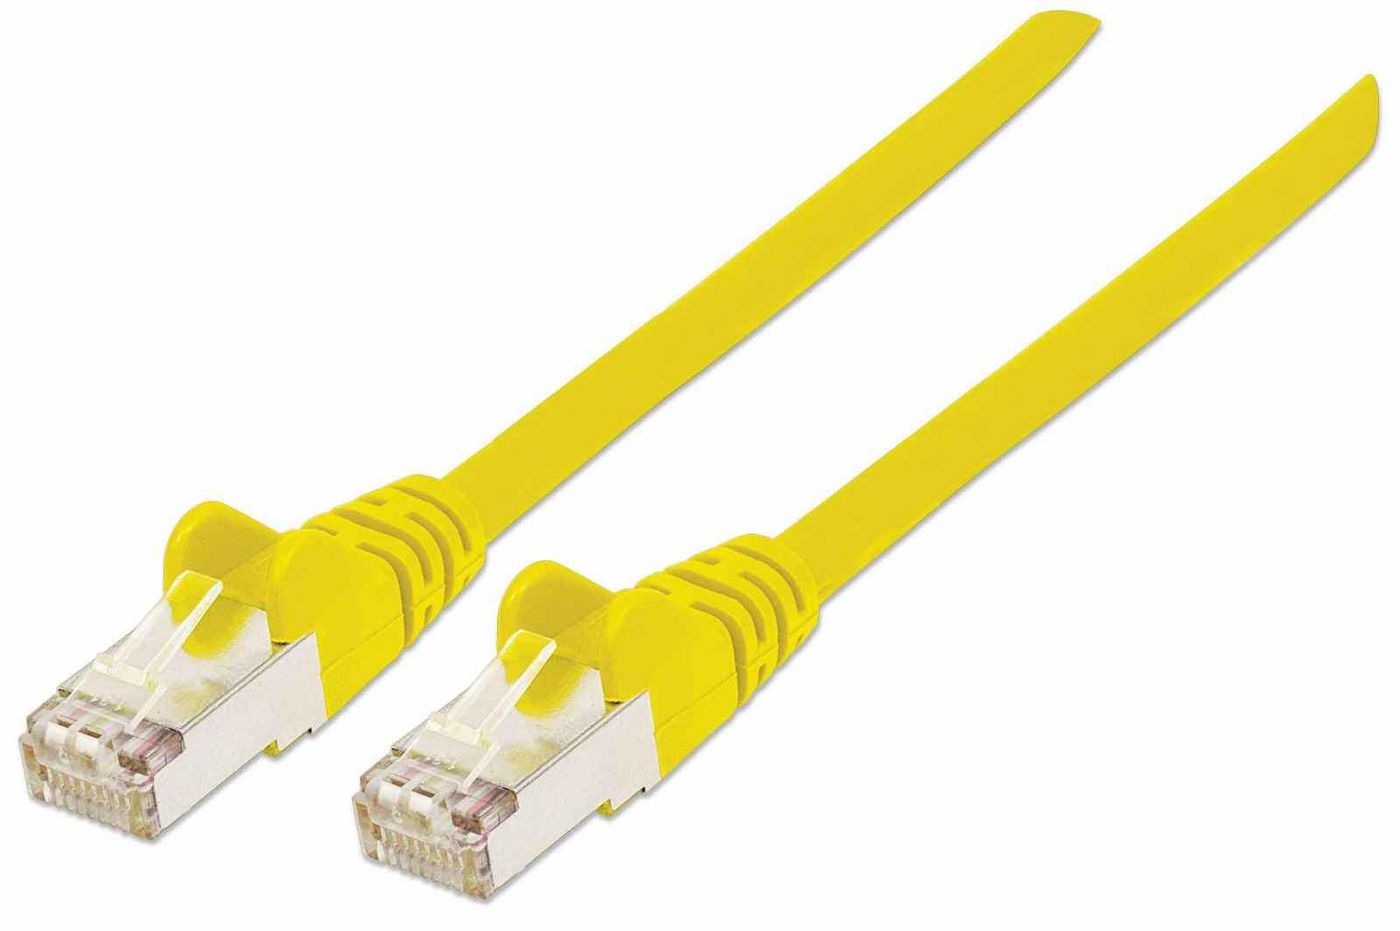 Intellinet 740708 High Performance Network Cable 